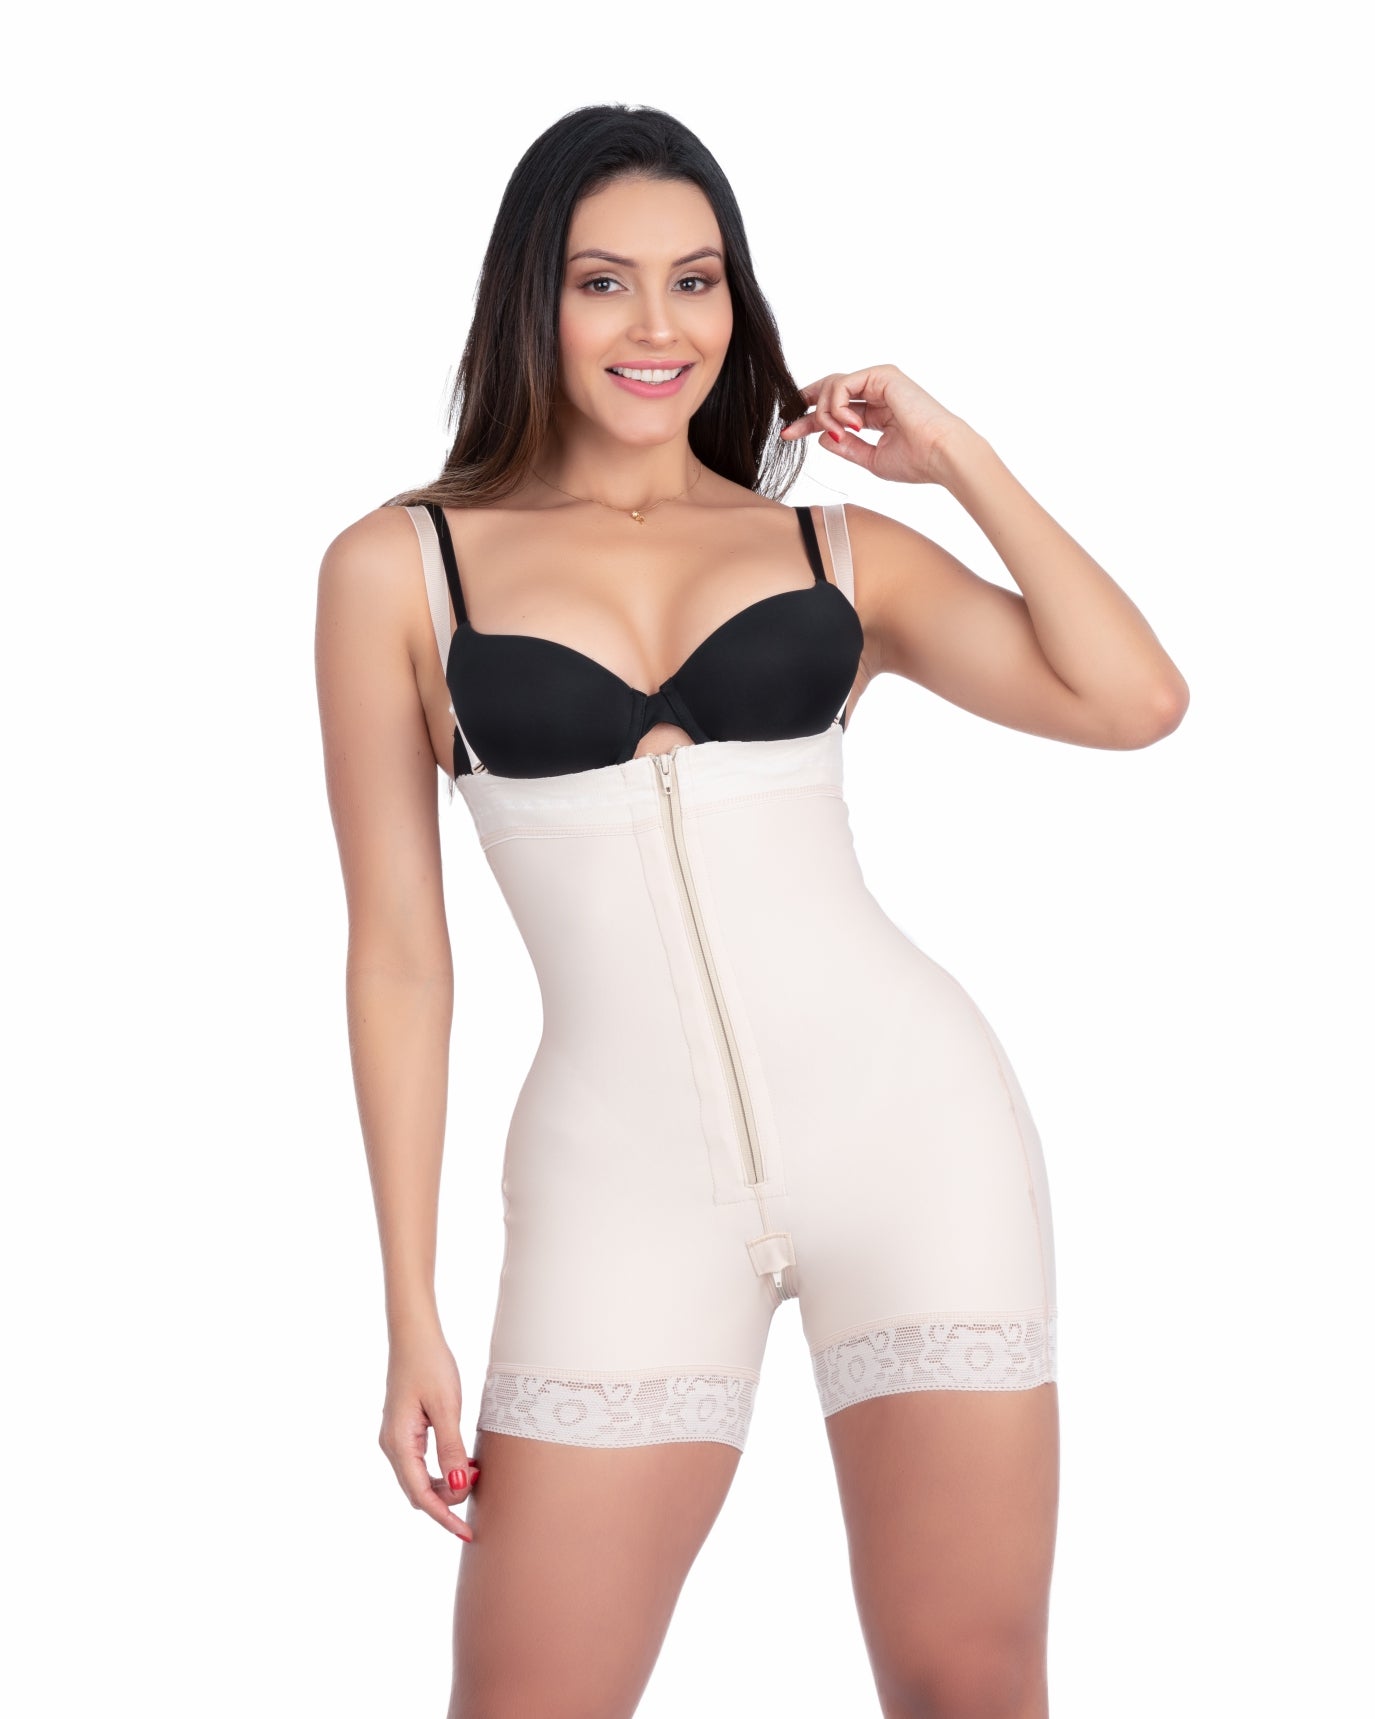 Knee-length girdle breast free Up Lady Ref. 6172 – Fantasy Lingerie NYC